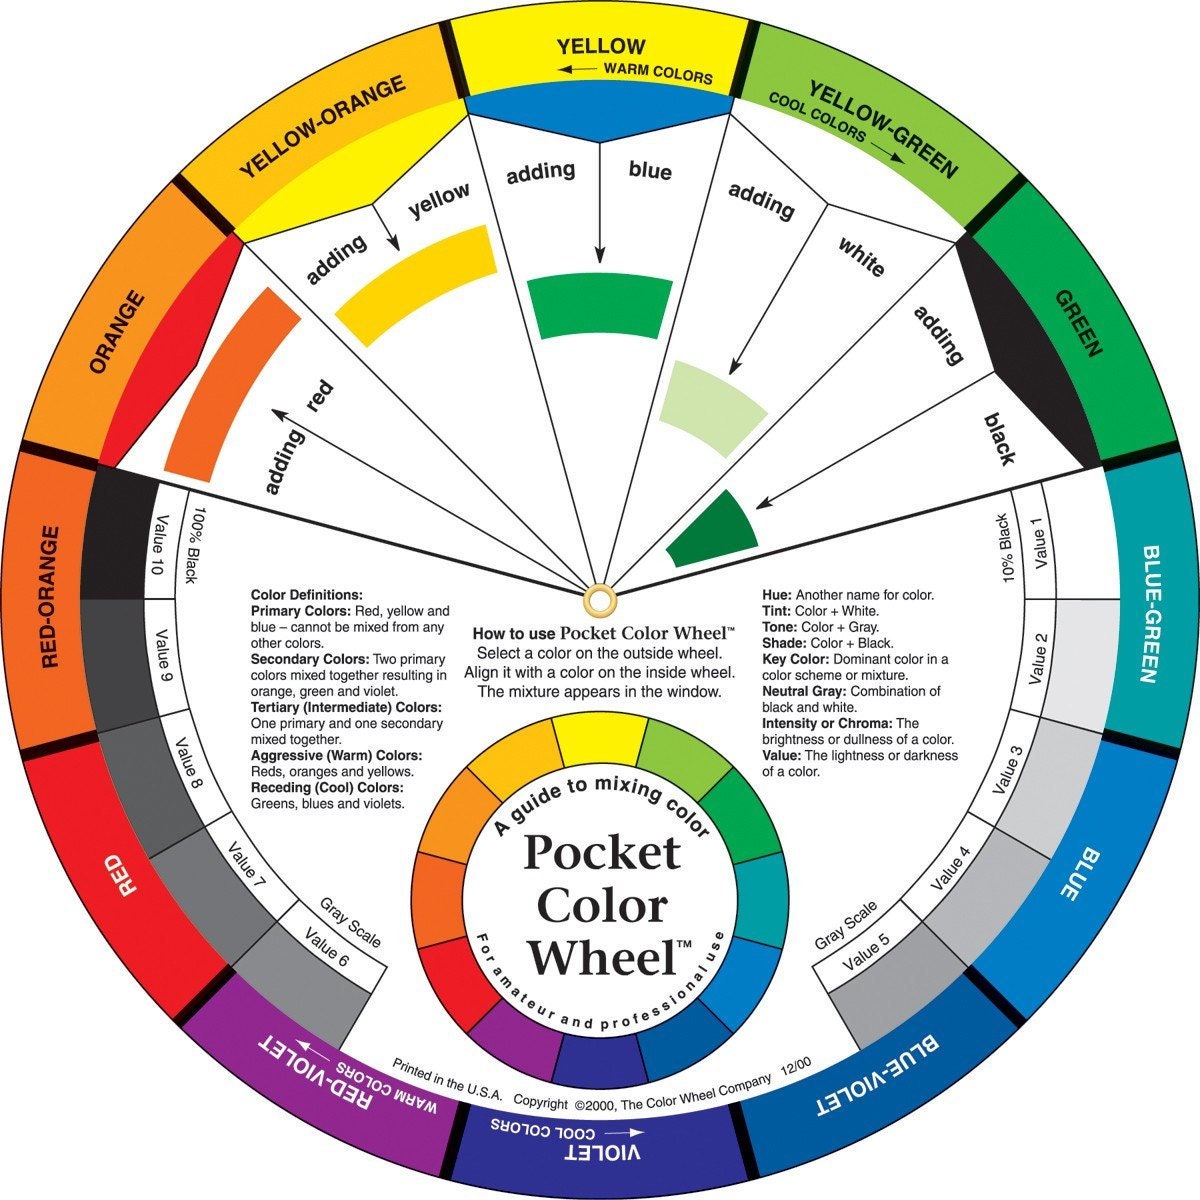 Color Wheel Pocket Size 5-1/8in Candle Color Mixing Guide pic